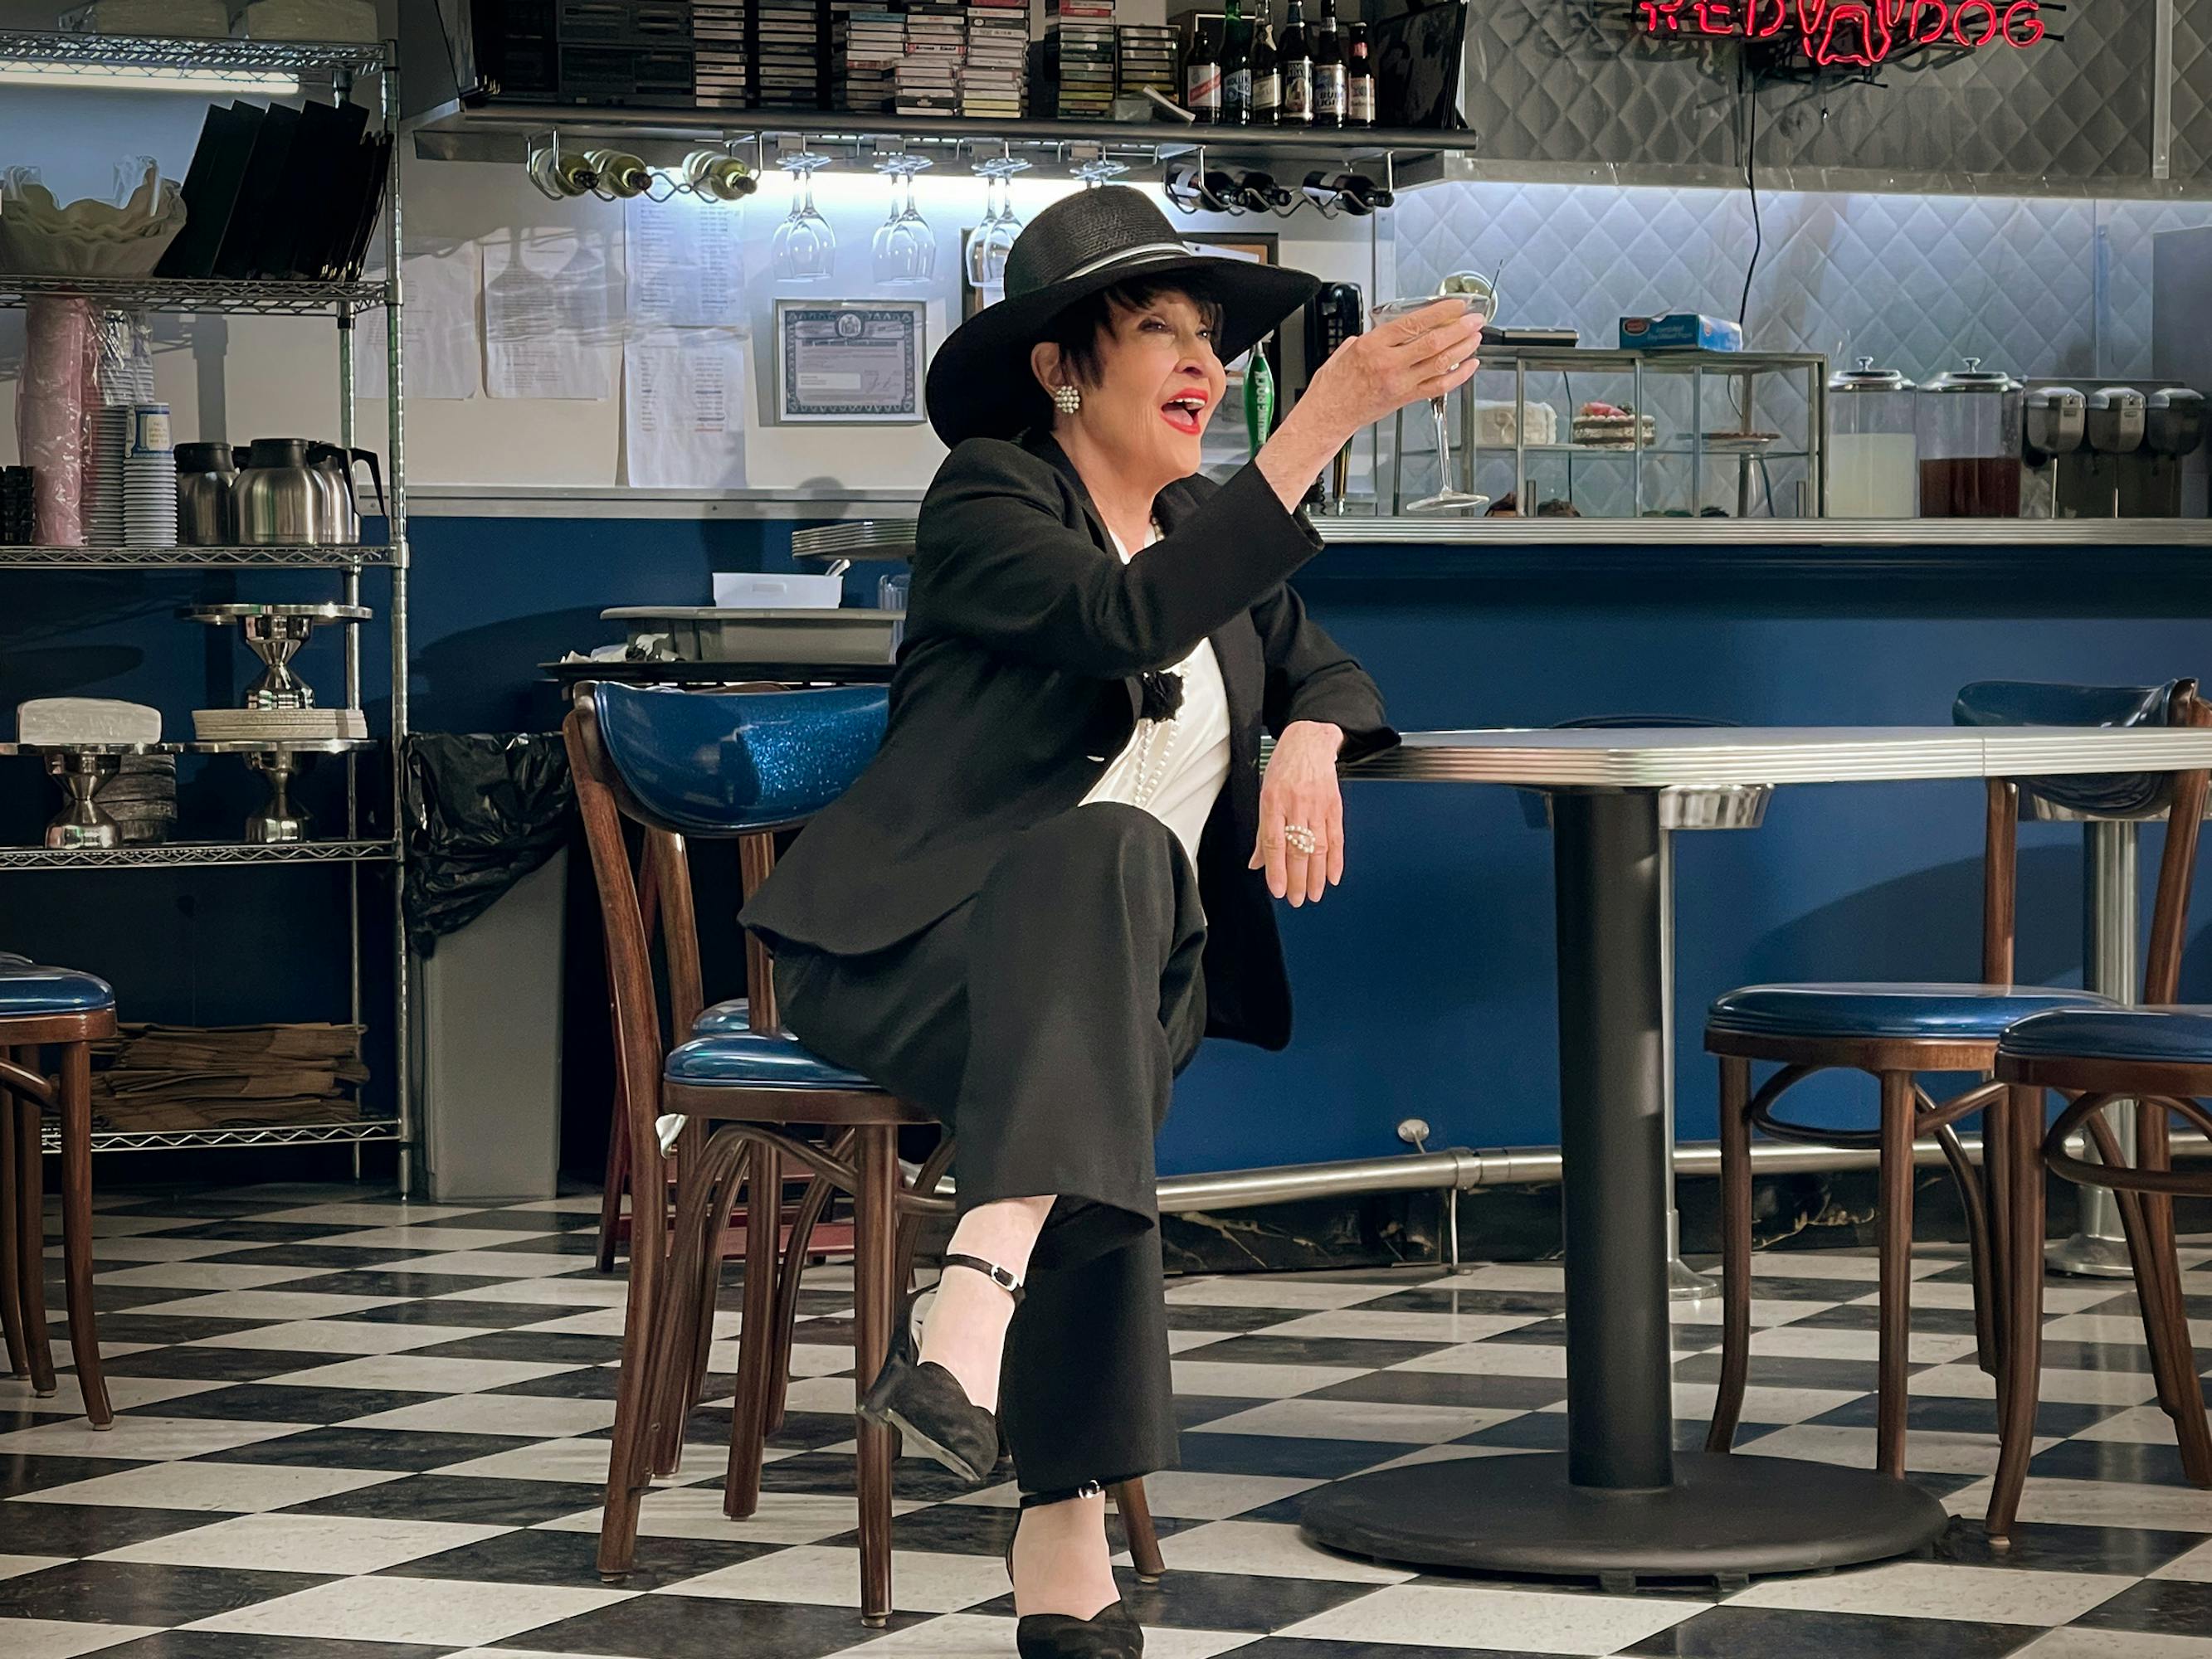 Chita Rivera wears a black suit and wide brimmed hat as she sits in the Moondance Diner.